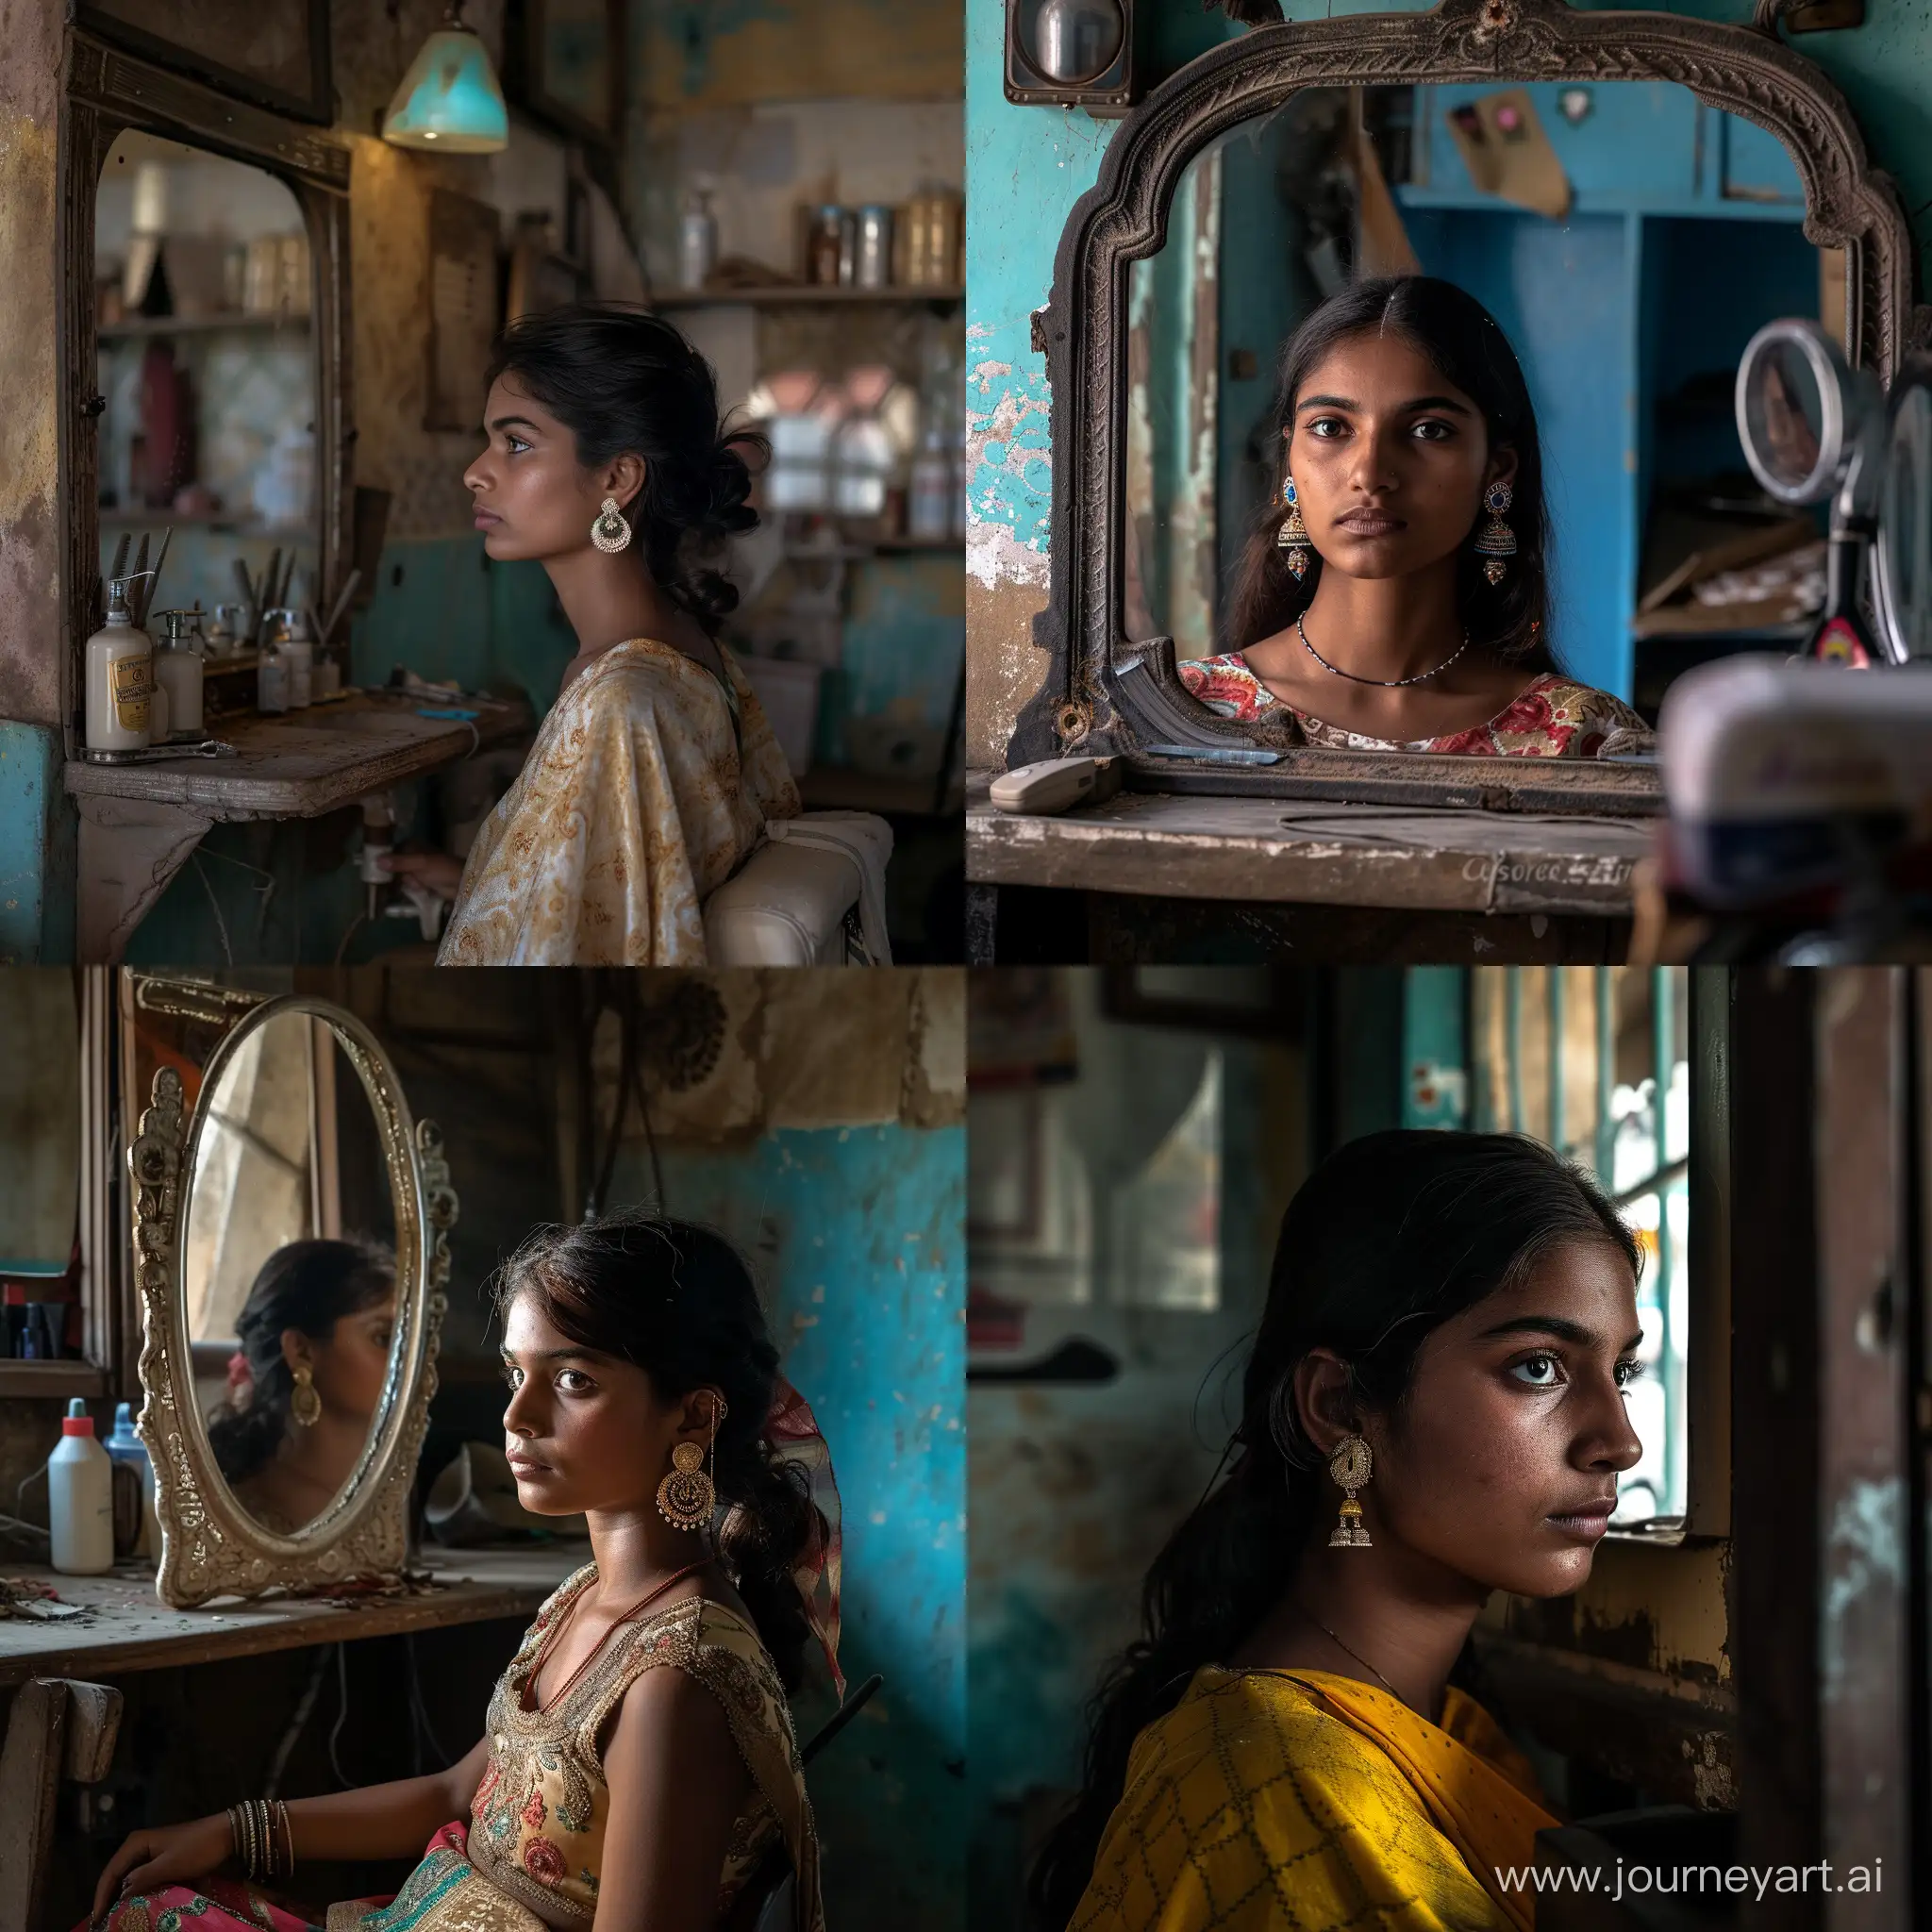 rabari rajasthan India  with earrings sitting in a old  barbershop  looking in the mirror   soft light  fotorealistisch low angle fuji xt4 wilde 24mm